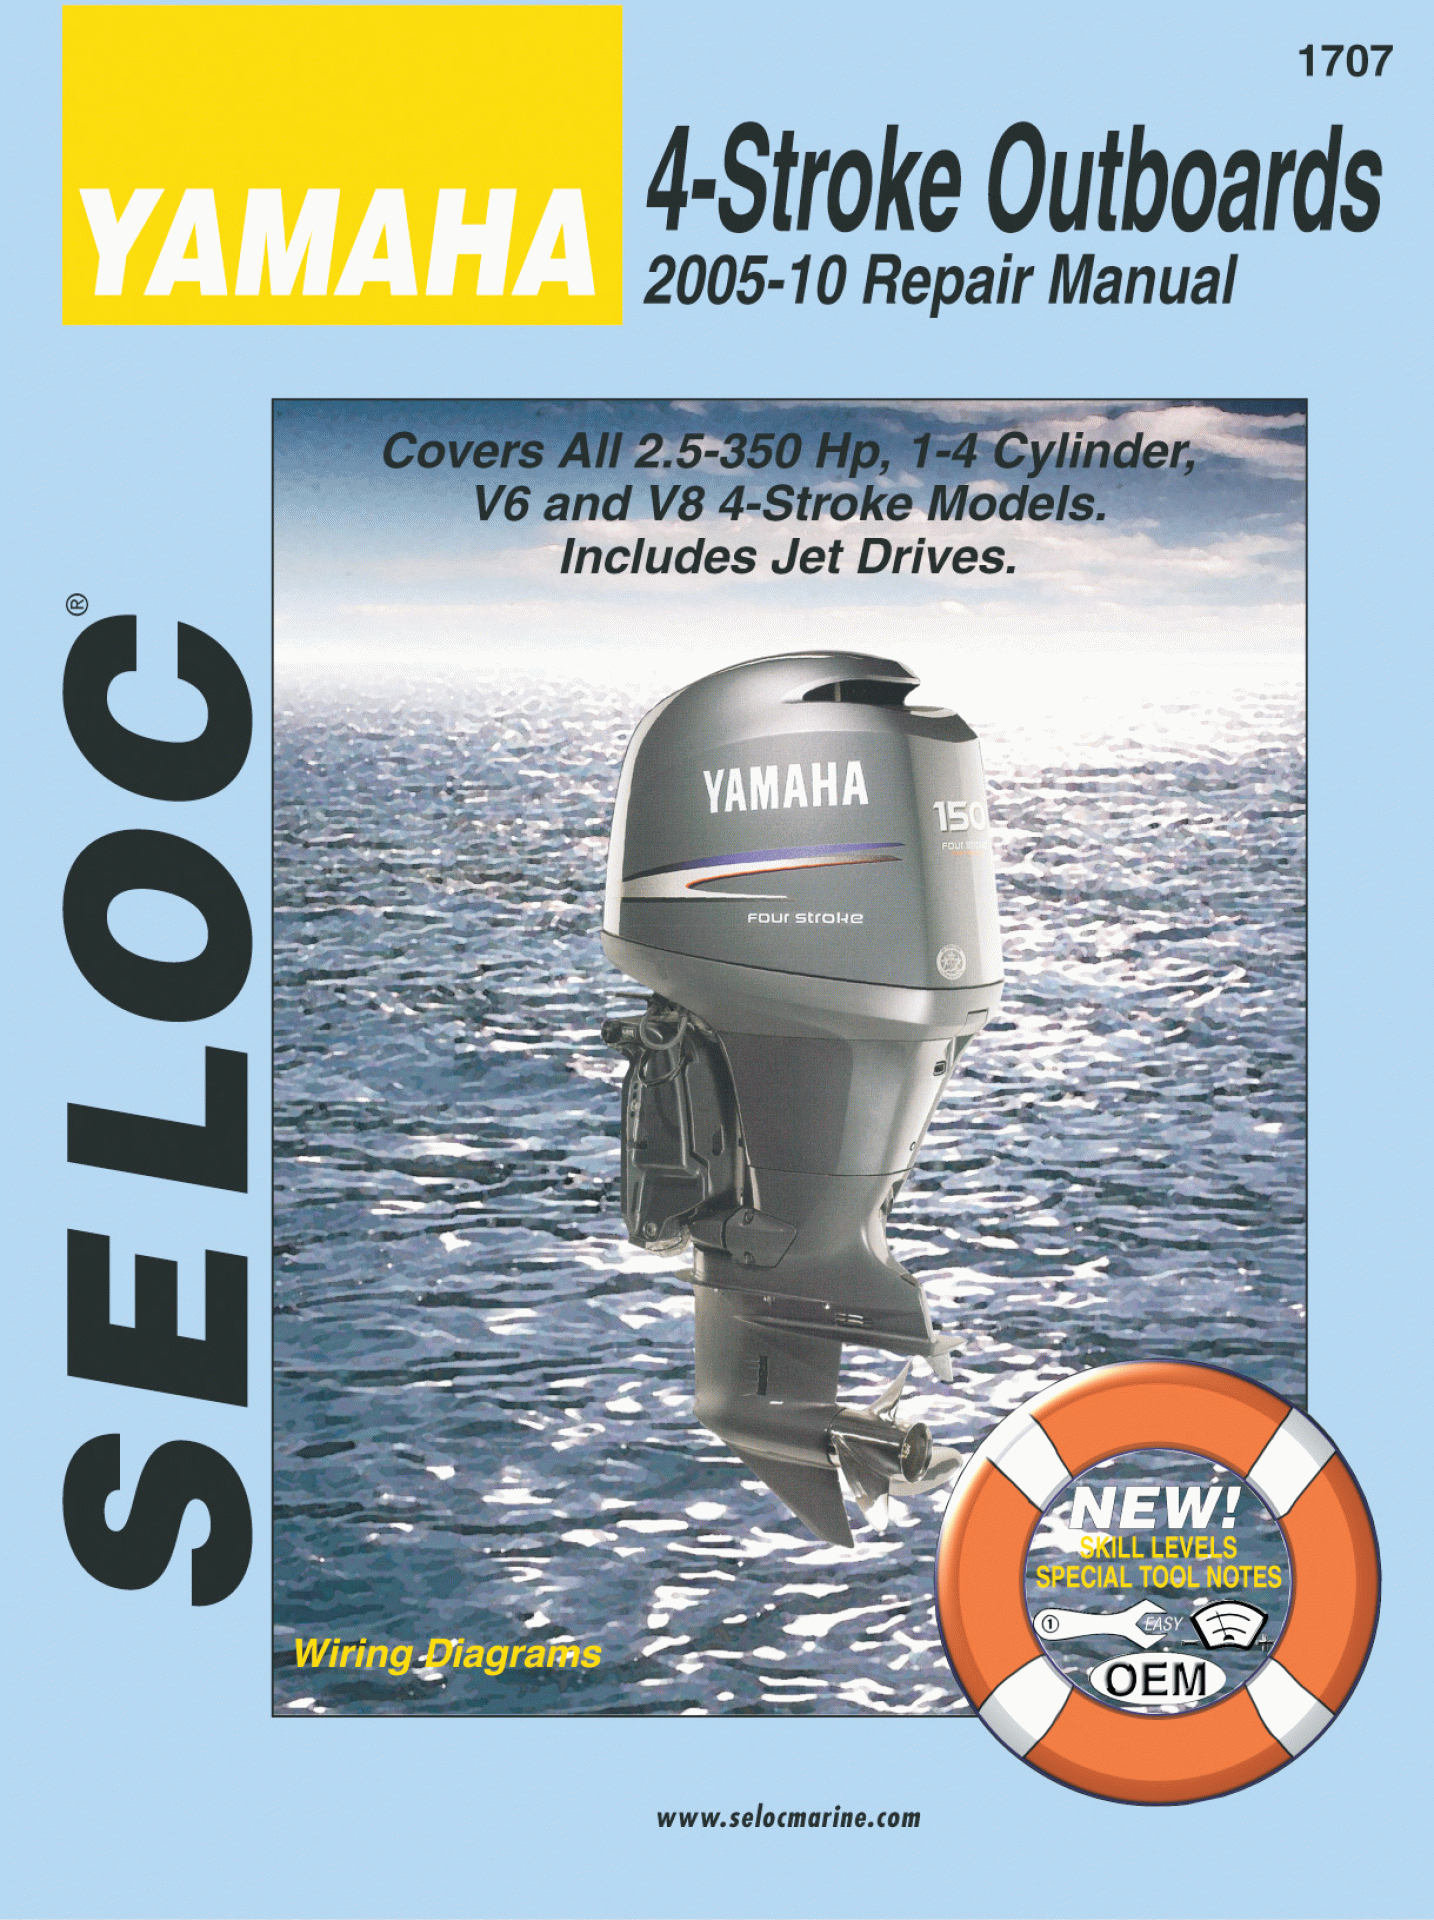 SELOC PUBLISHING | 18-01707 | REPAIR MANUAL Yamaha Outboards All 4-Stroke Engines 2005-10